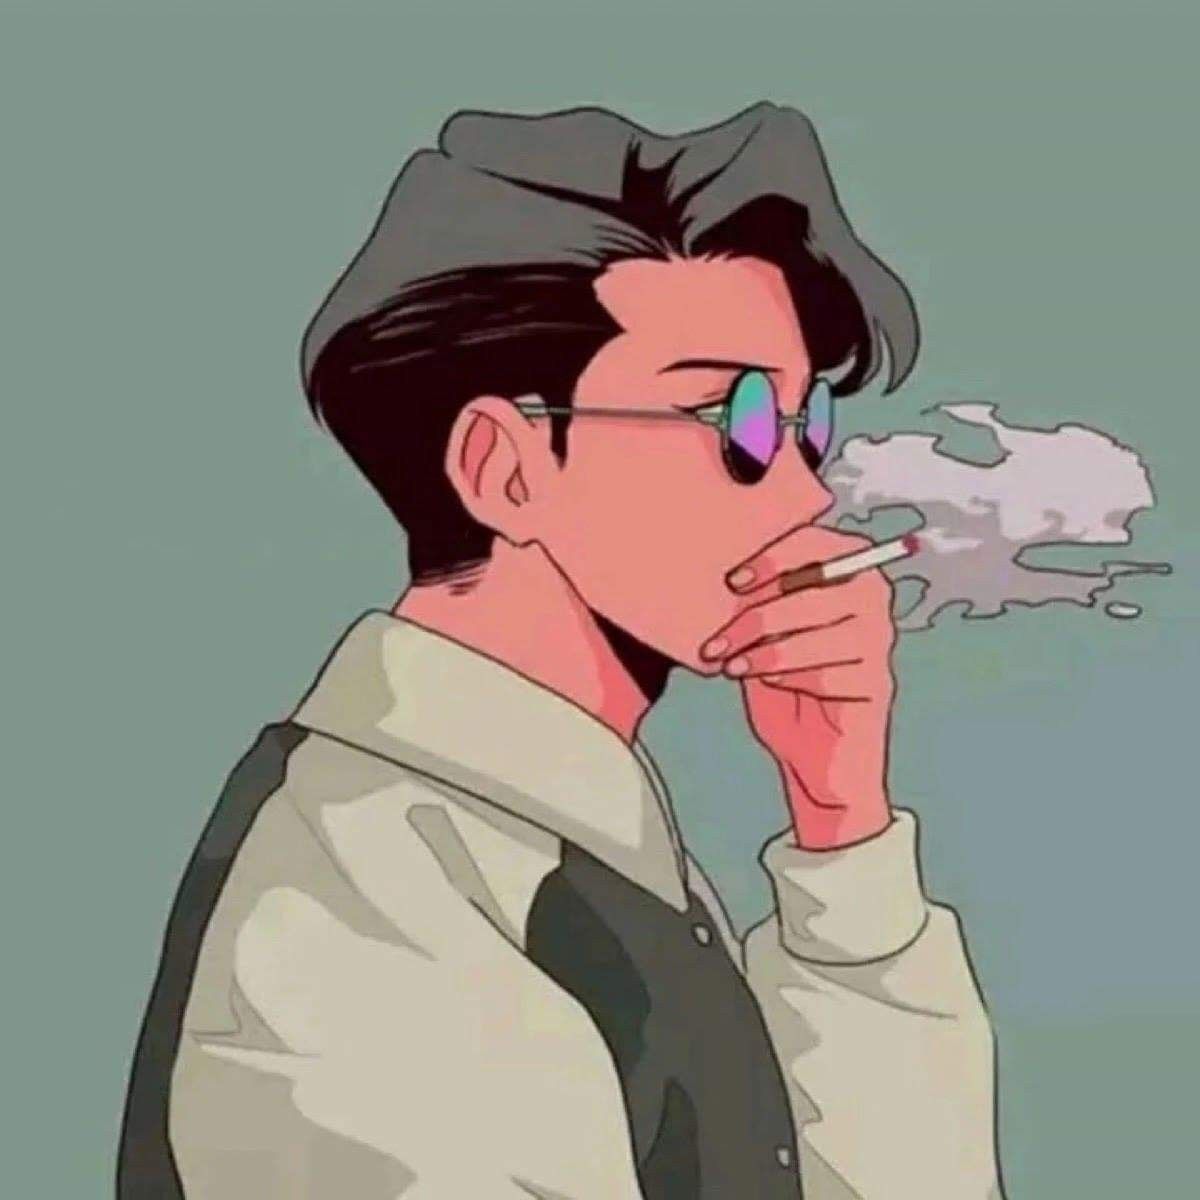 Profile picture. Aesthetic anime